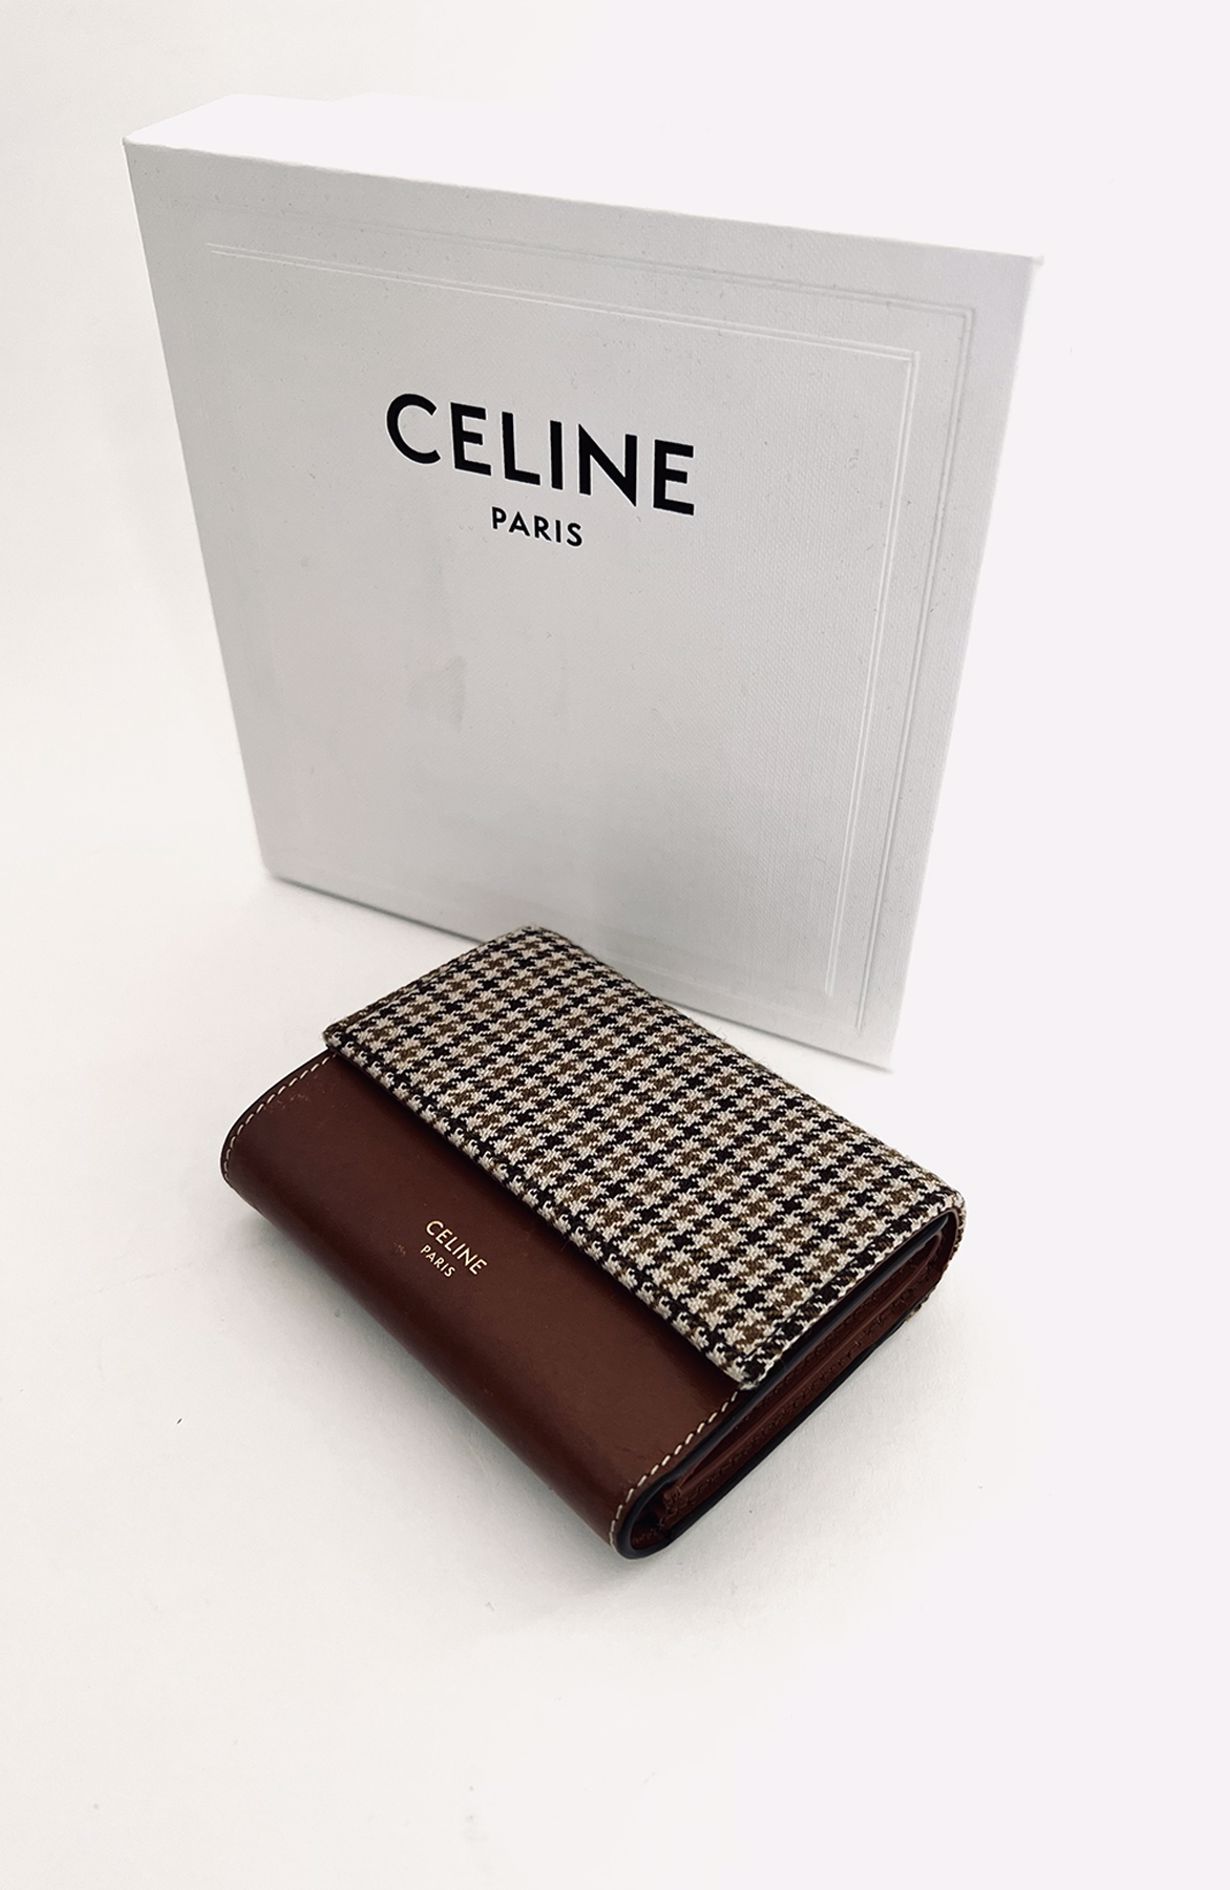 Celine Wallet With Box